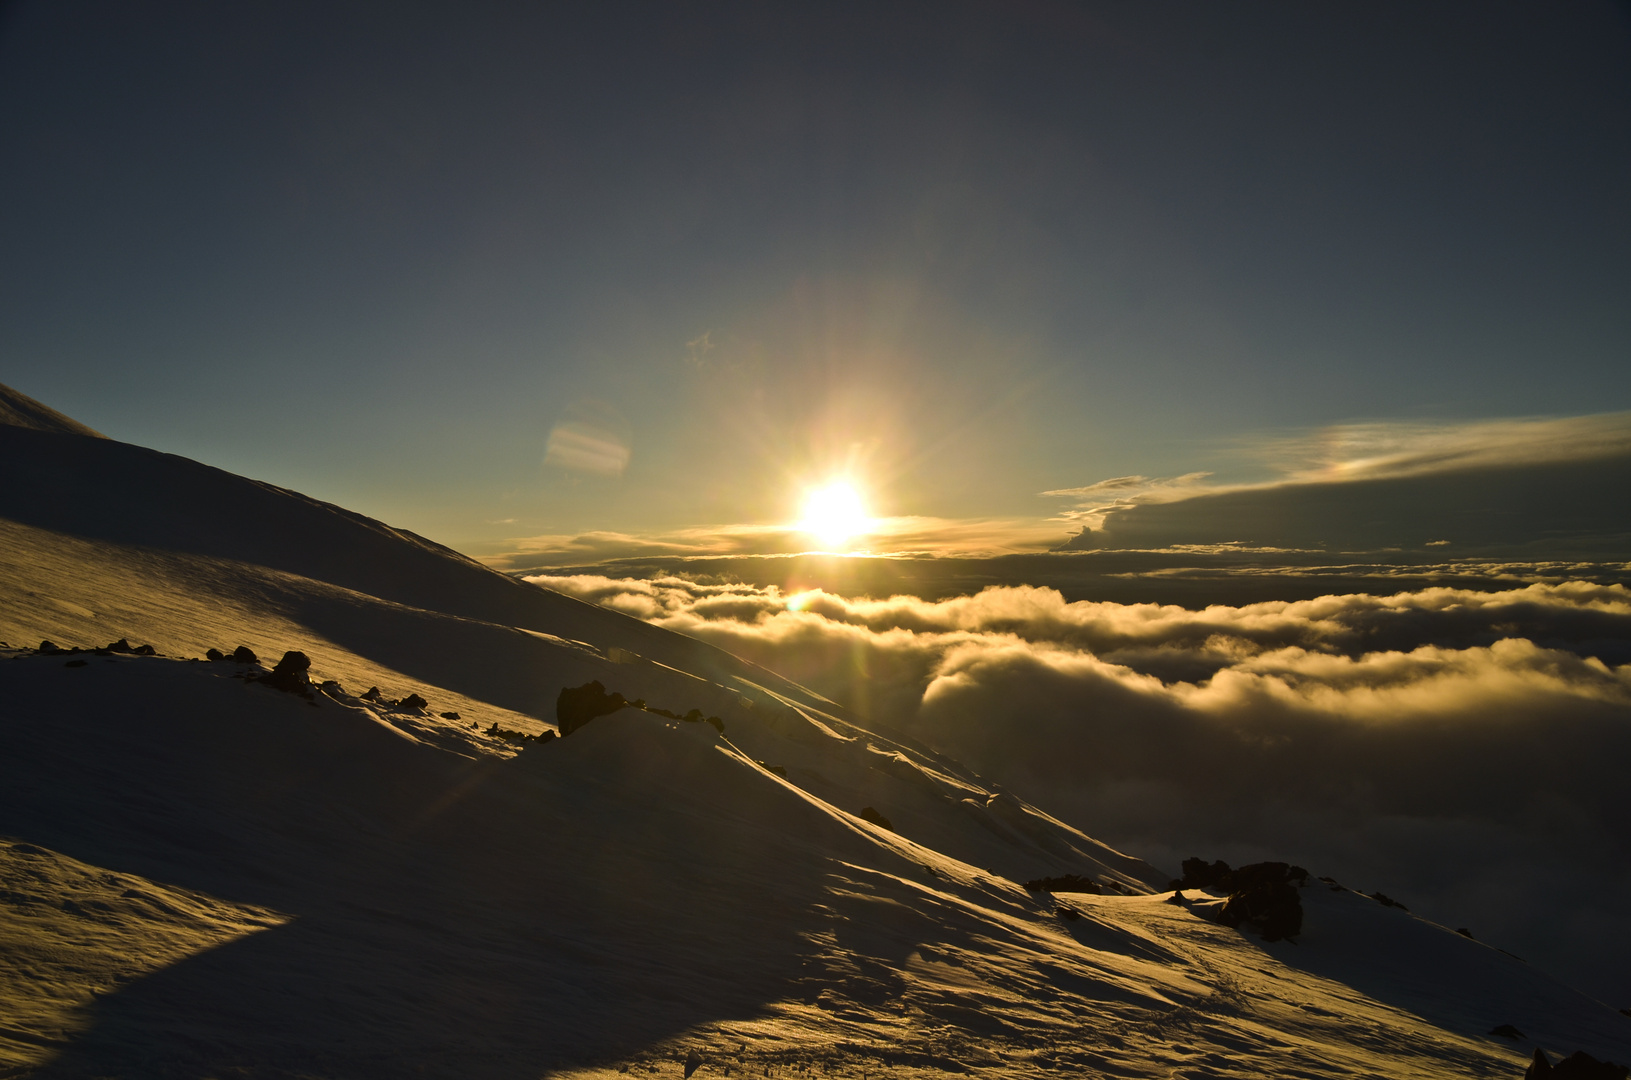 Have you ever sleep over 4000meters and look to a Sunset !?